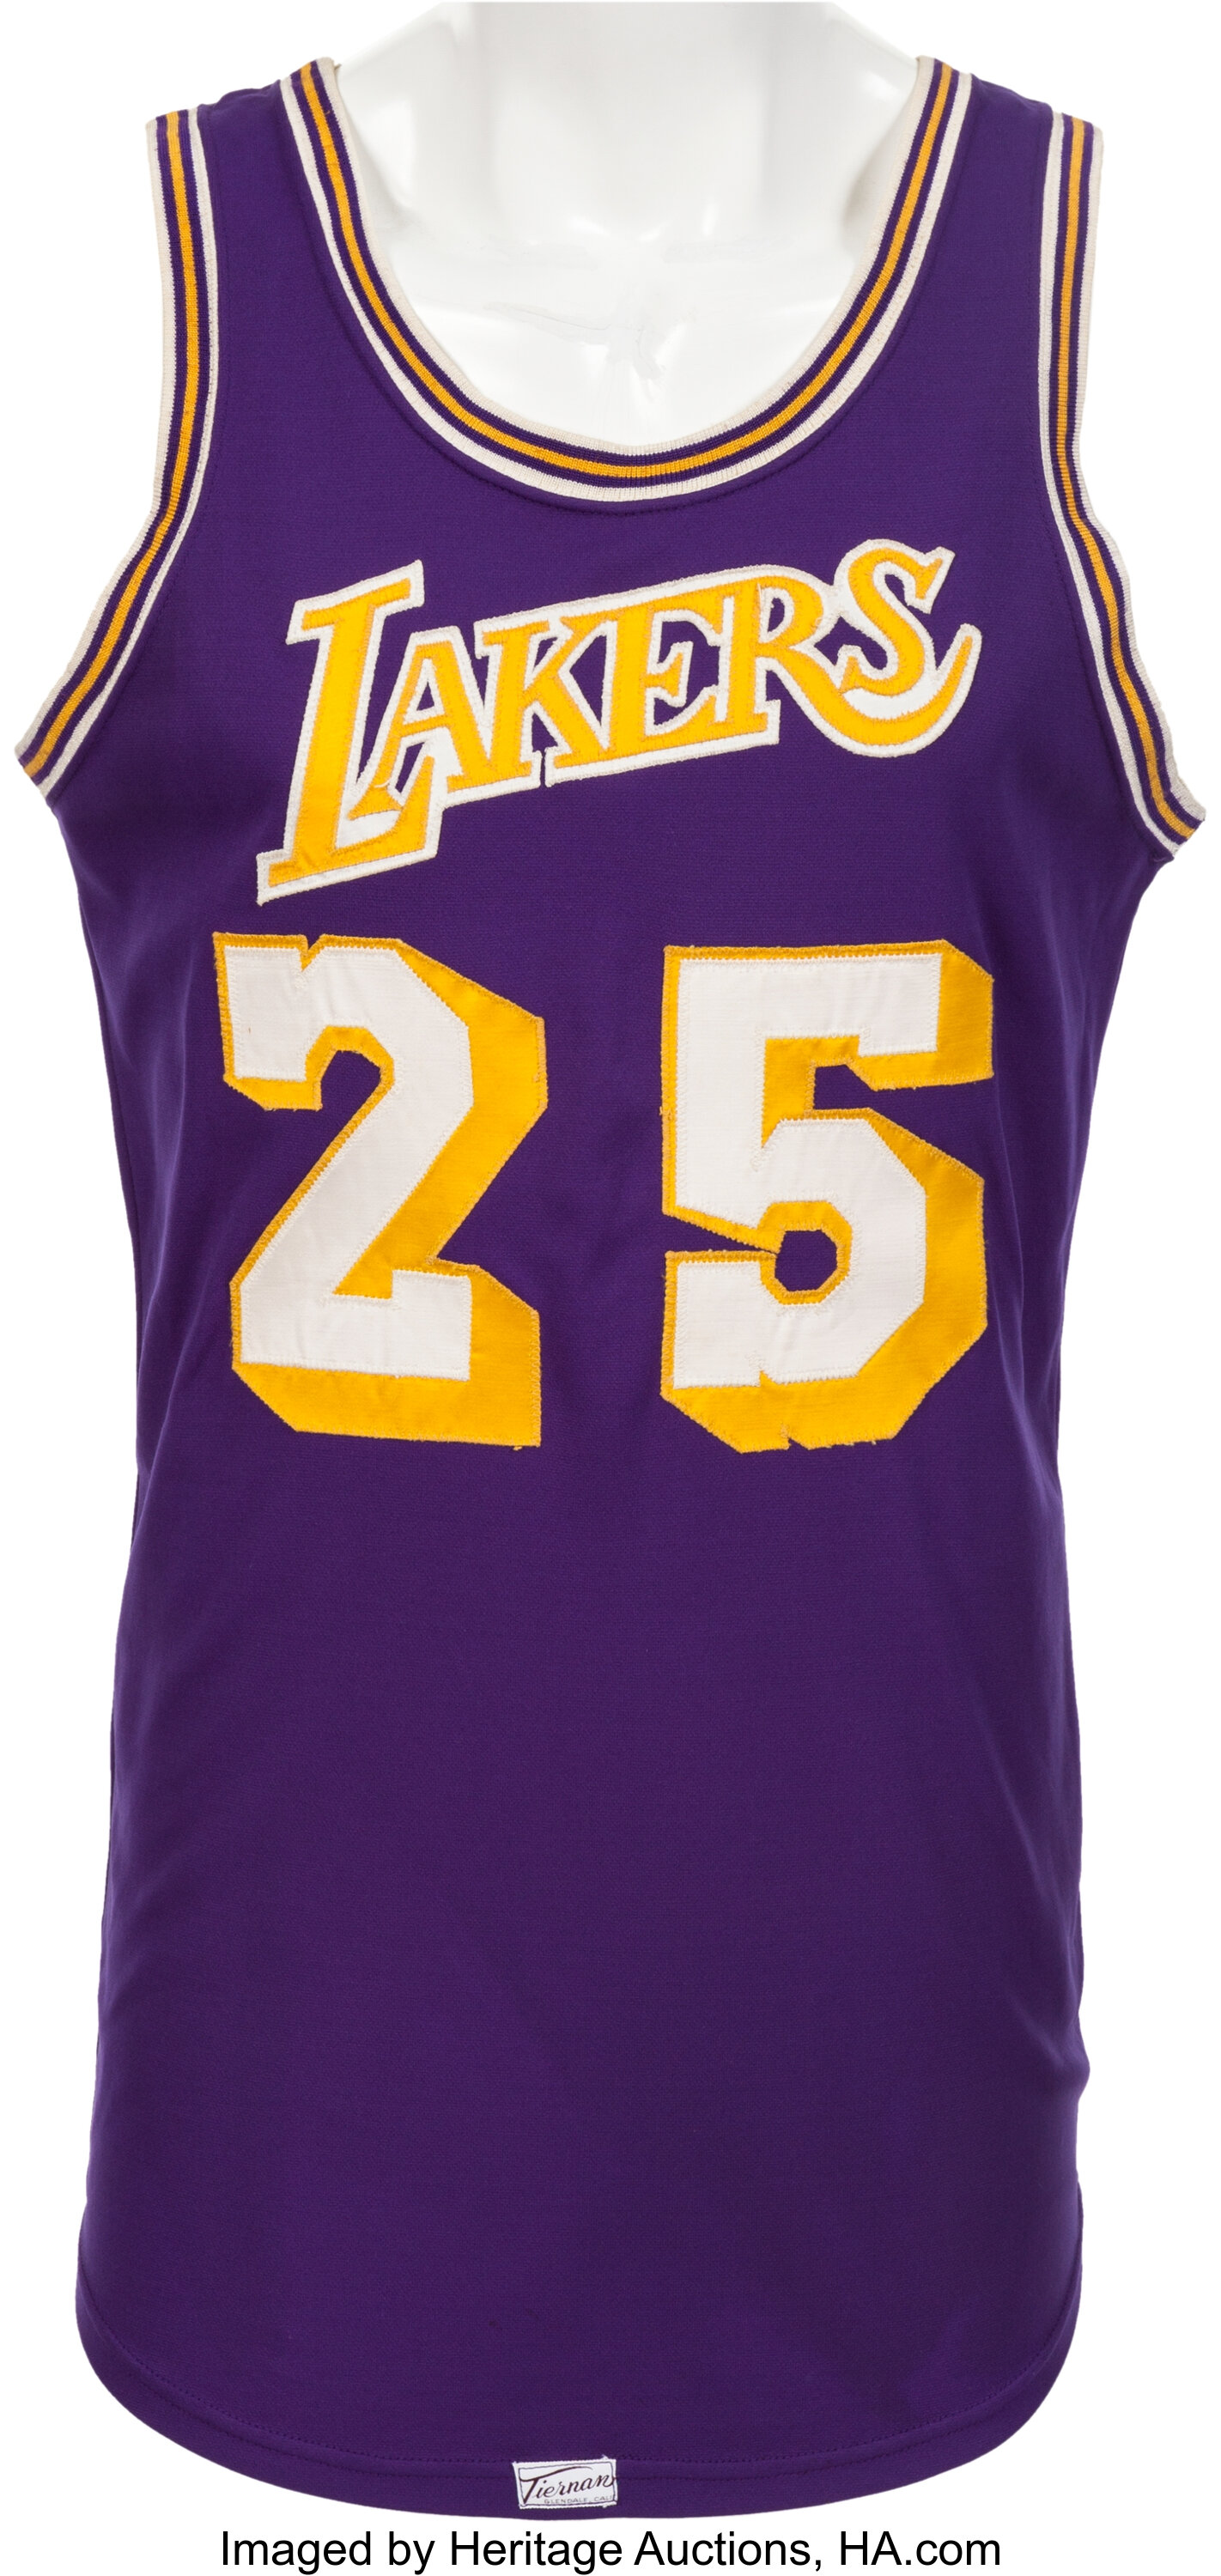 New Custom Gail Goodrich Lakers Jersey Size 2XL for Sale in New